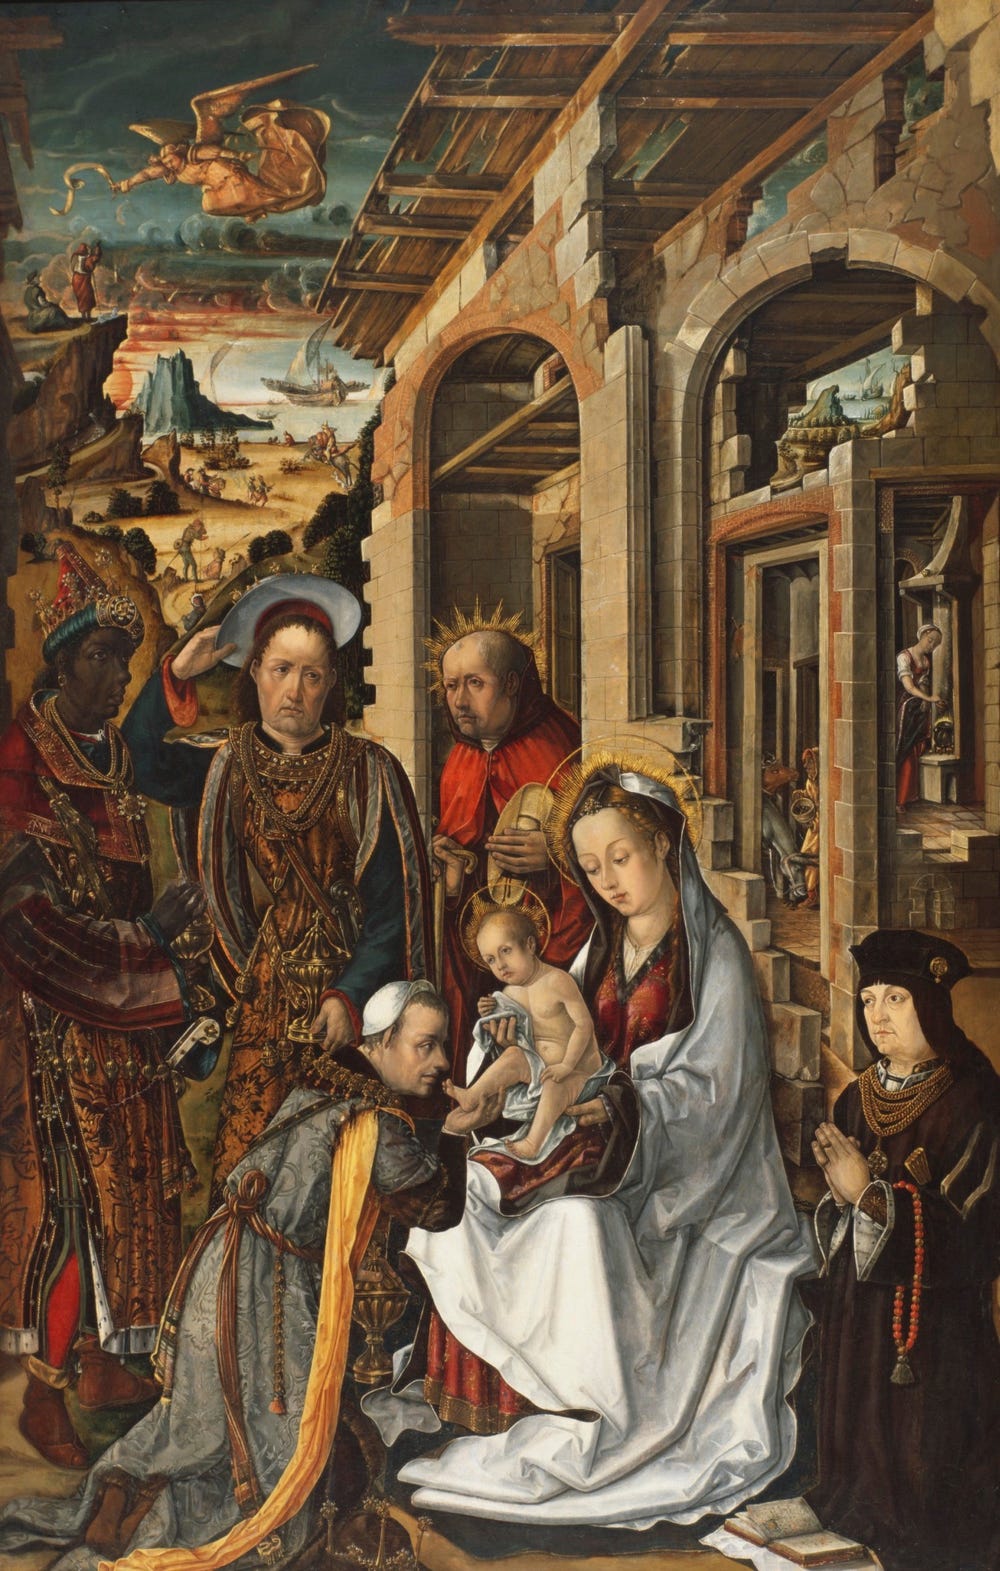 Mary holding baby Jesus, being adored by the magi